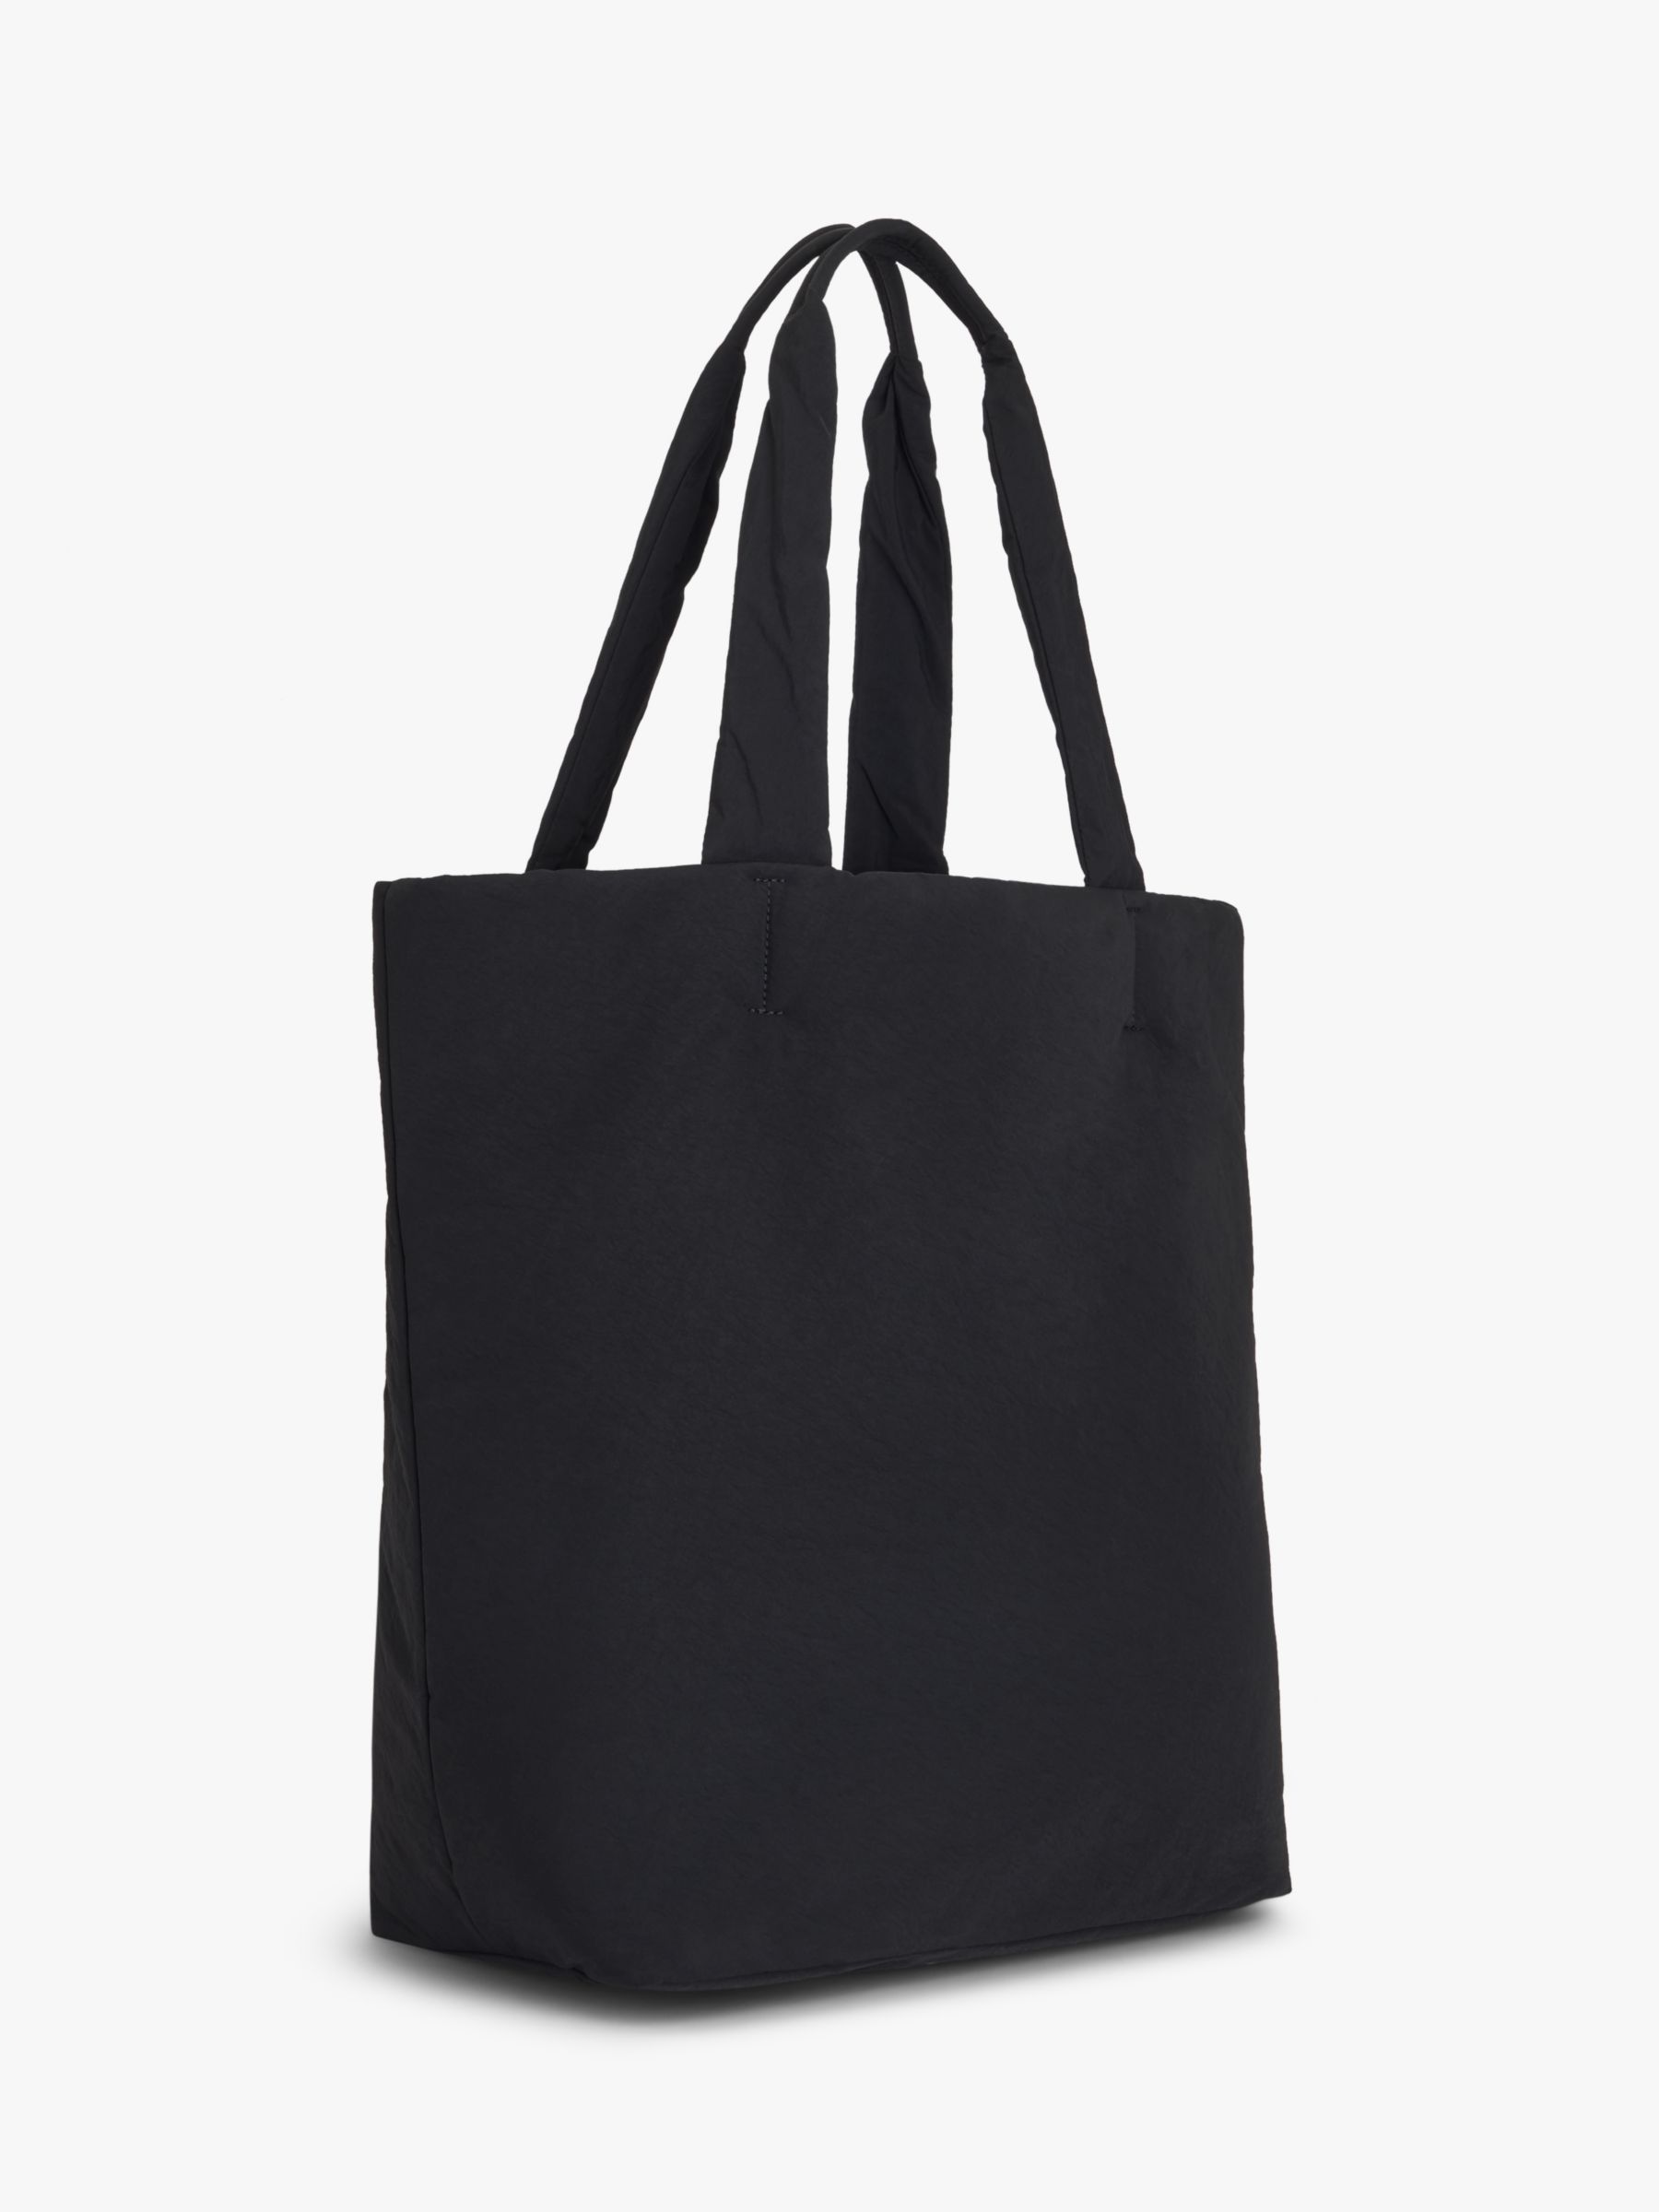 John Lewis ANYDAY Puffy North South Tote Bag, Black